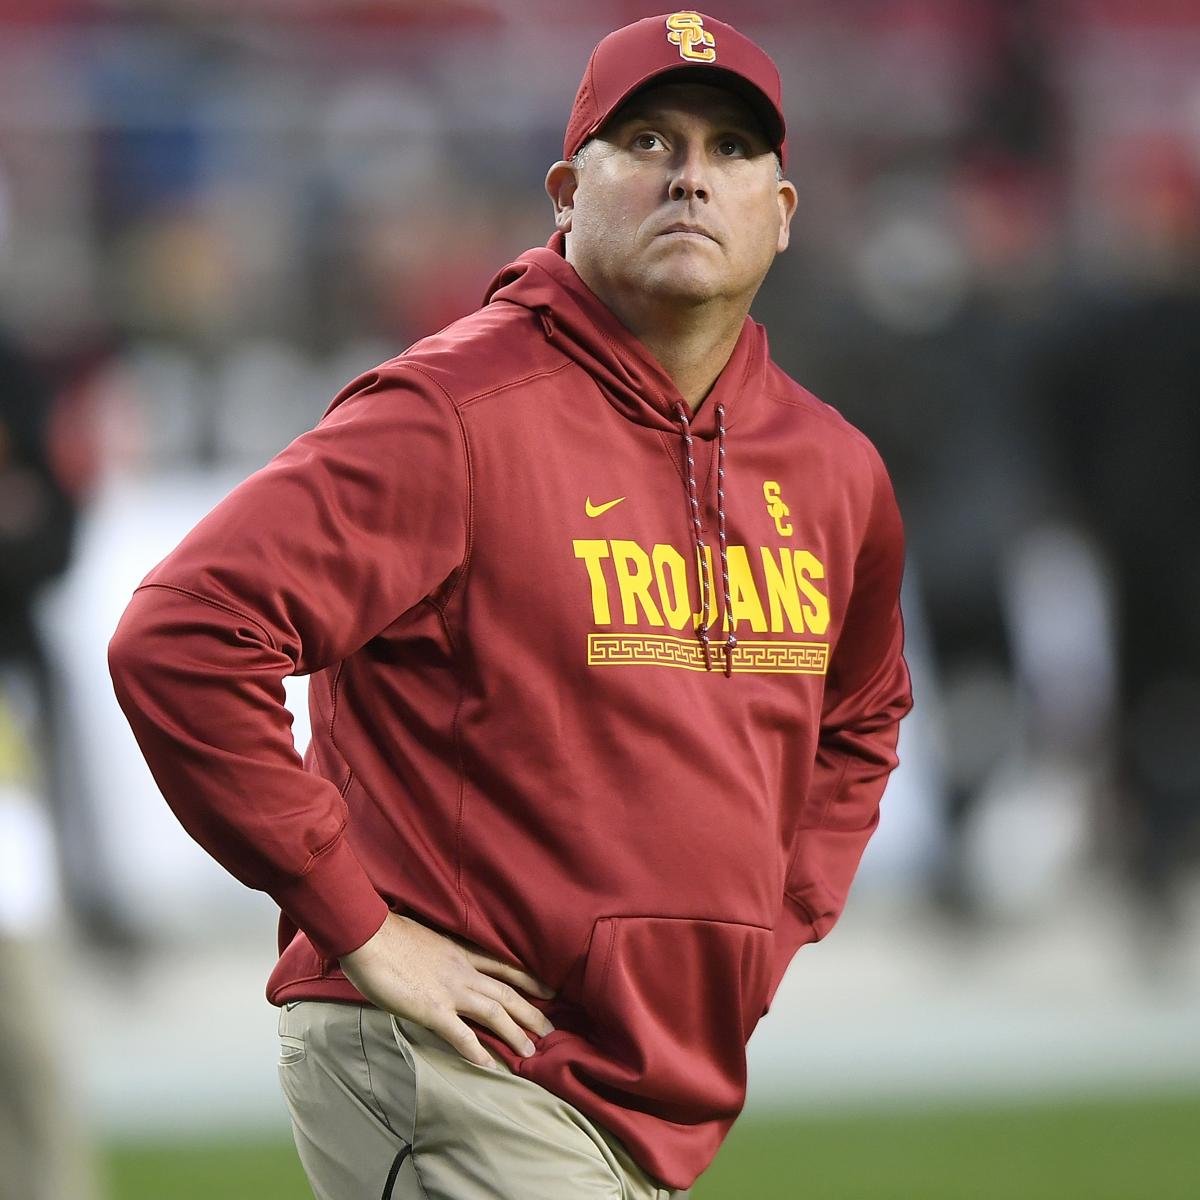 USC rewards coach Staley with contract extension